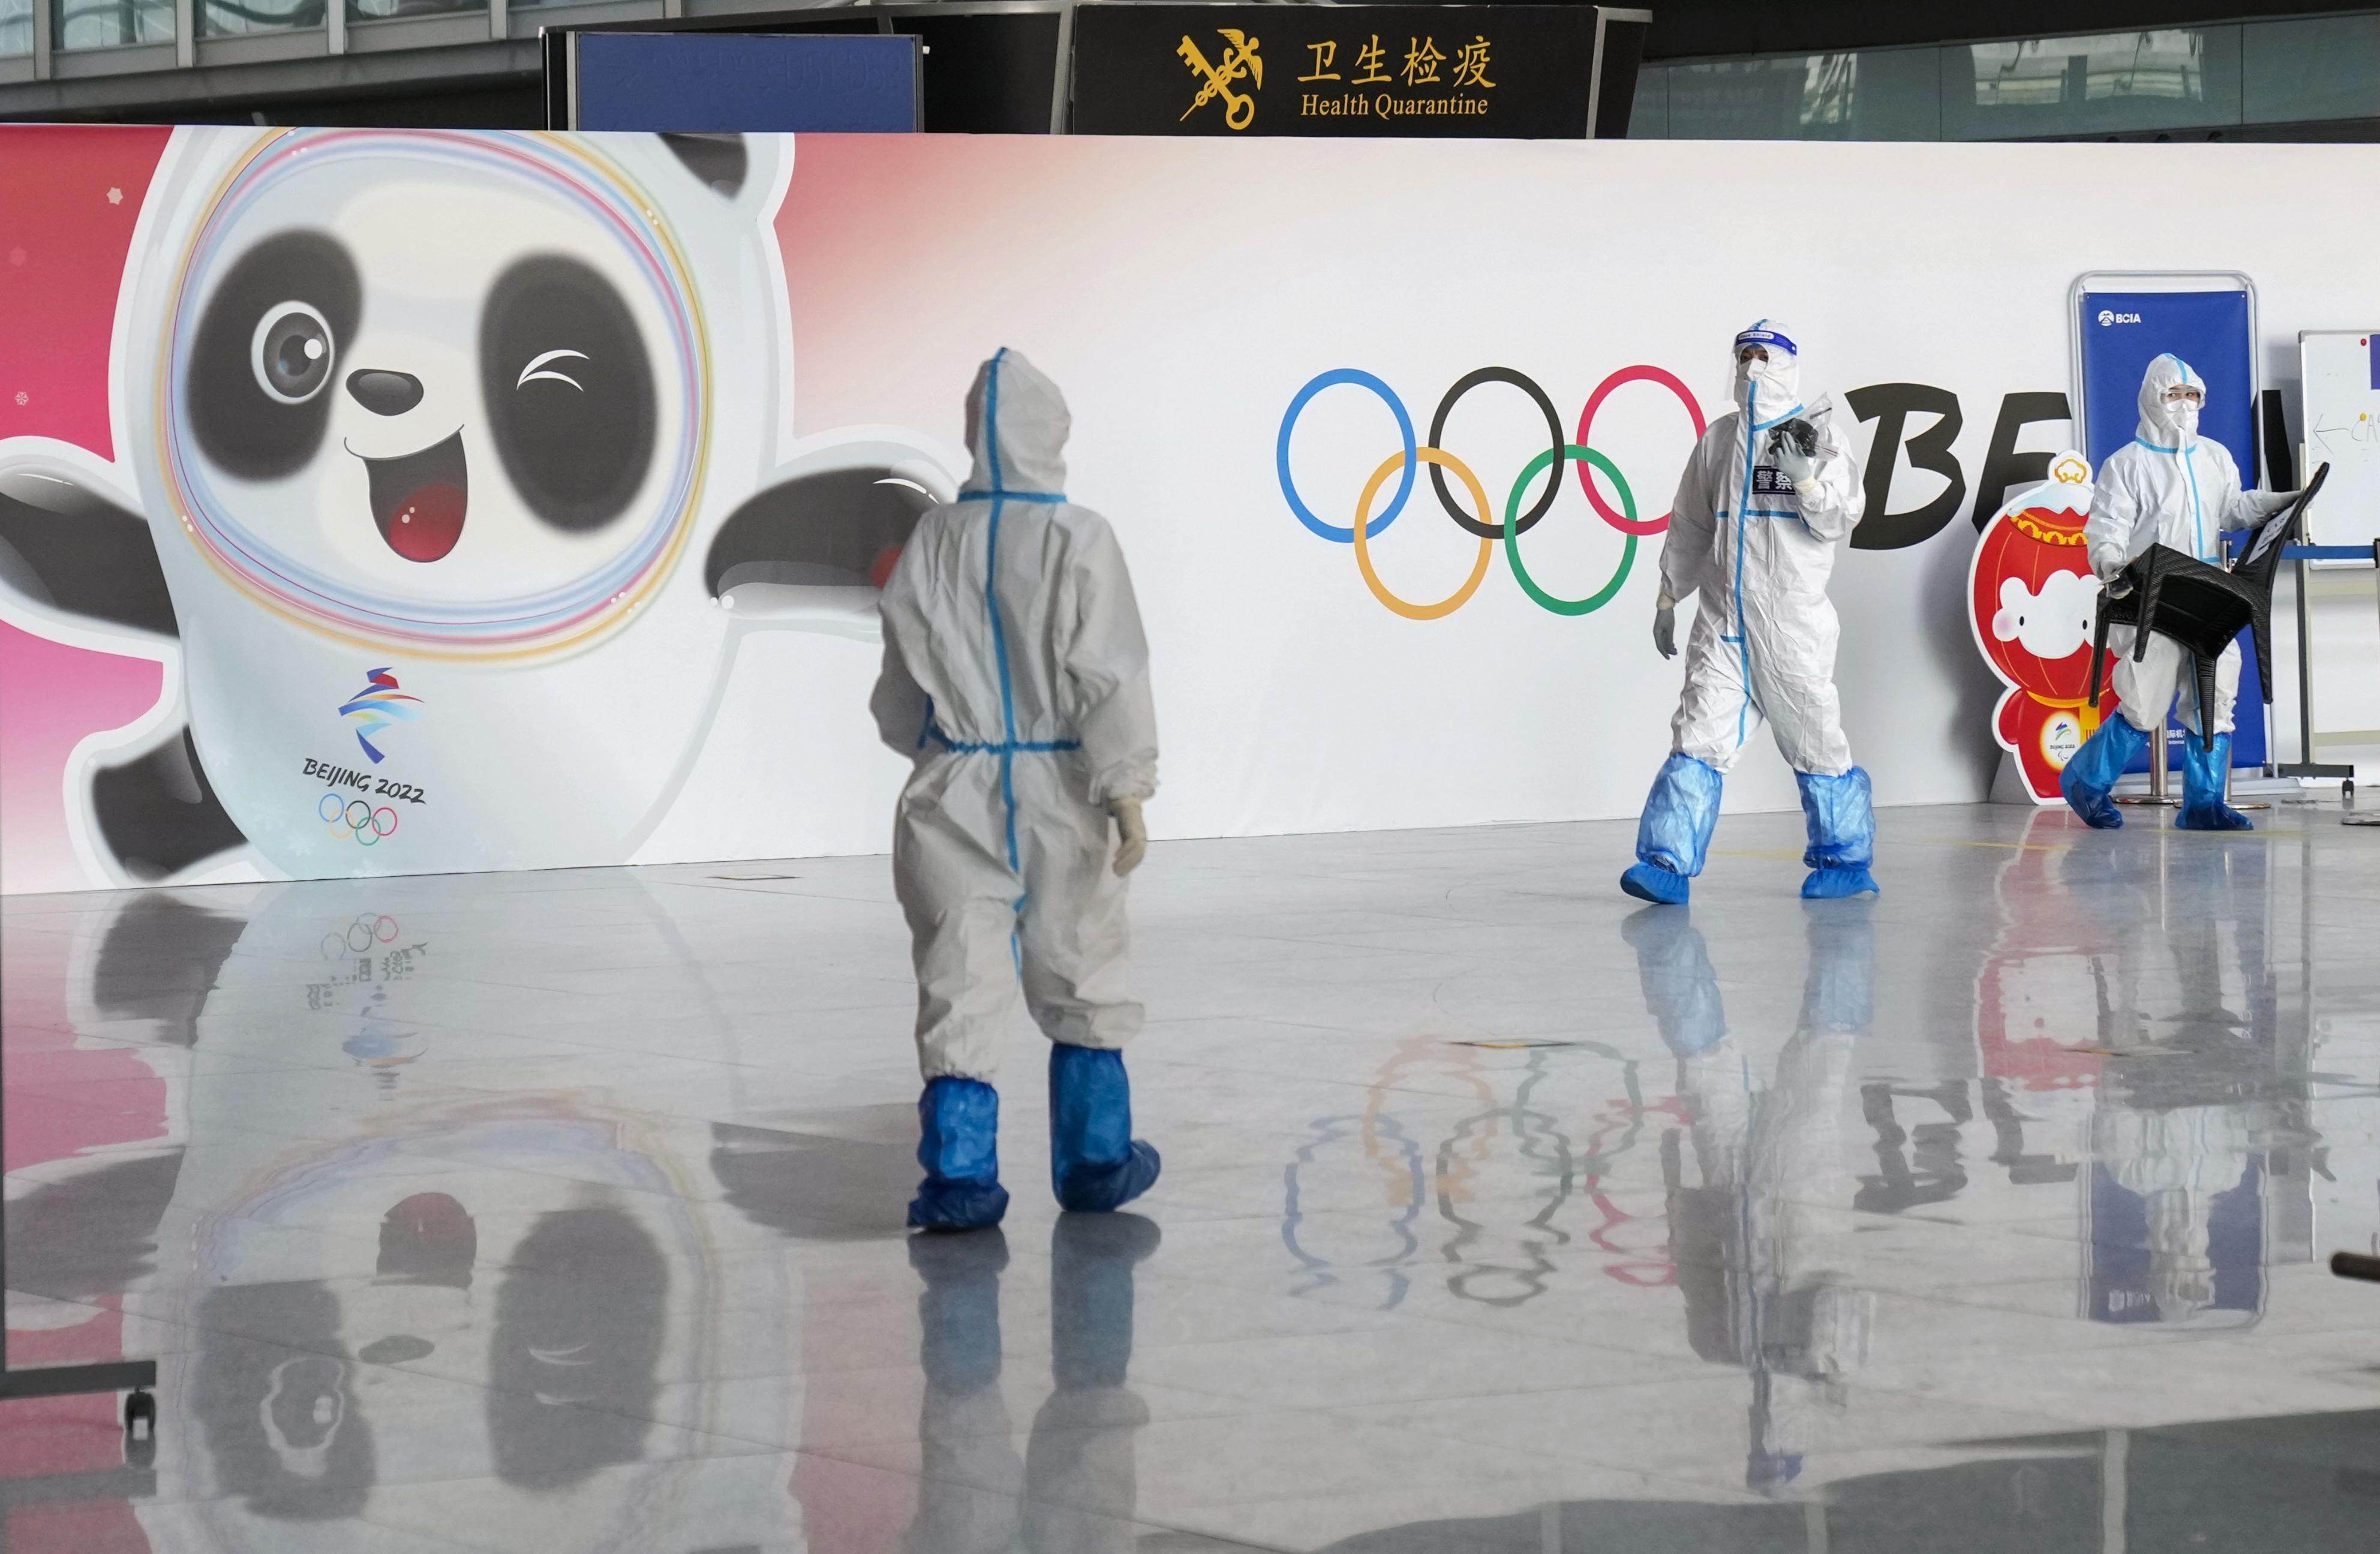 Officials wear protective gear at Beijing Capital International Airport amid Covid-19 fears as the city prepares to host the Winter Olympics. Photo: Kyodo